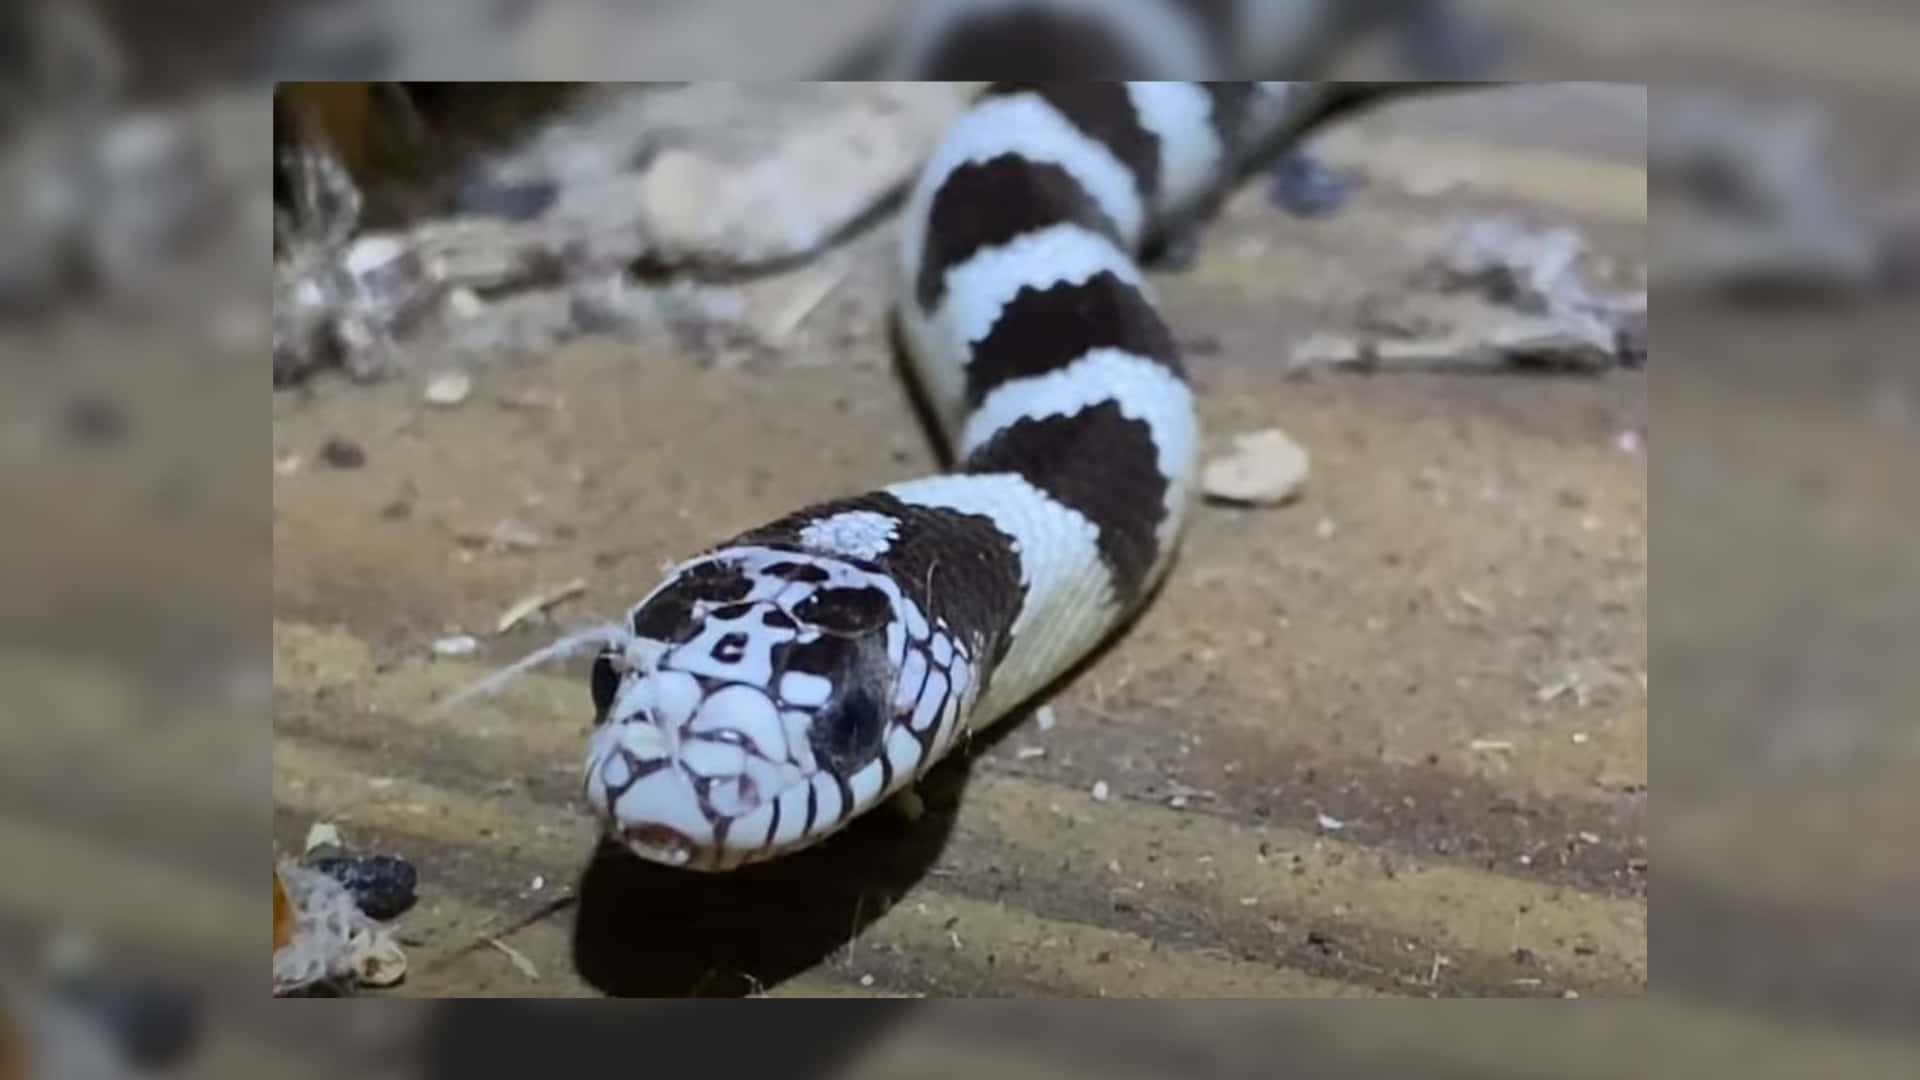 A Snake With Black And White Stripes Is Laying On The Ground